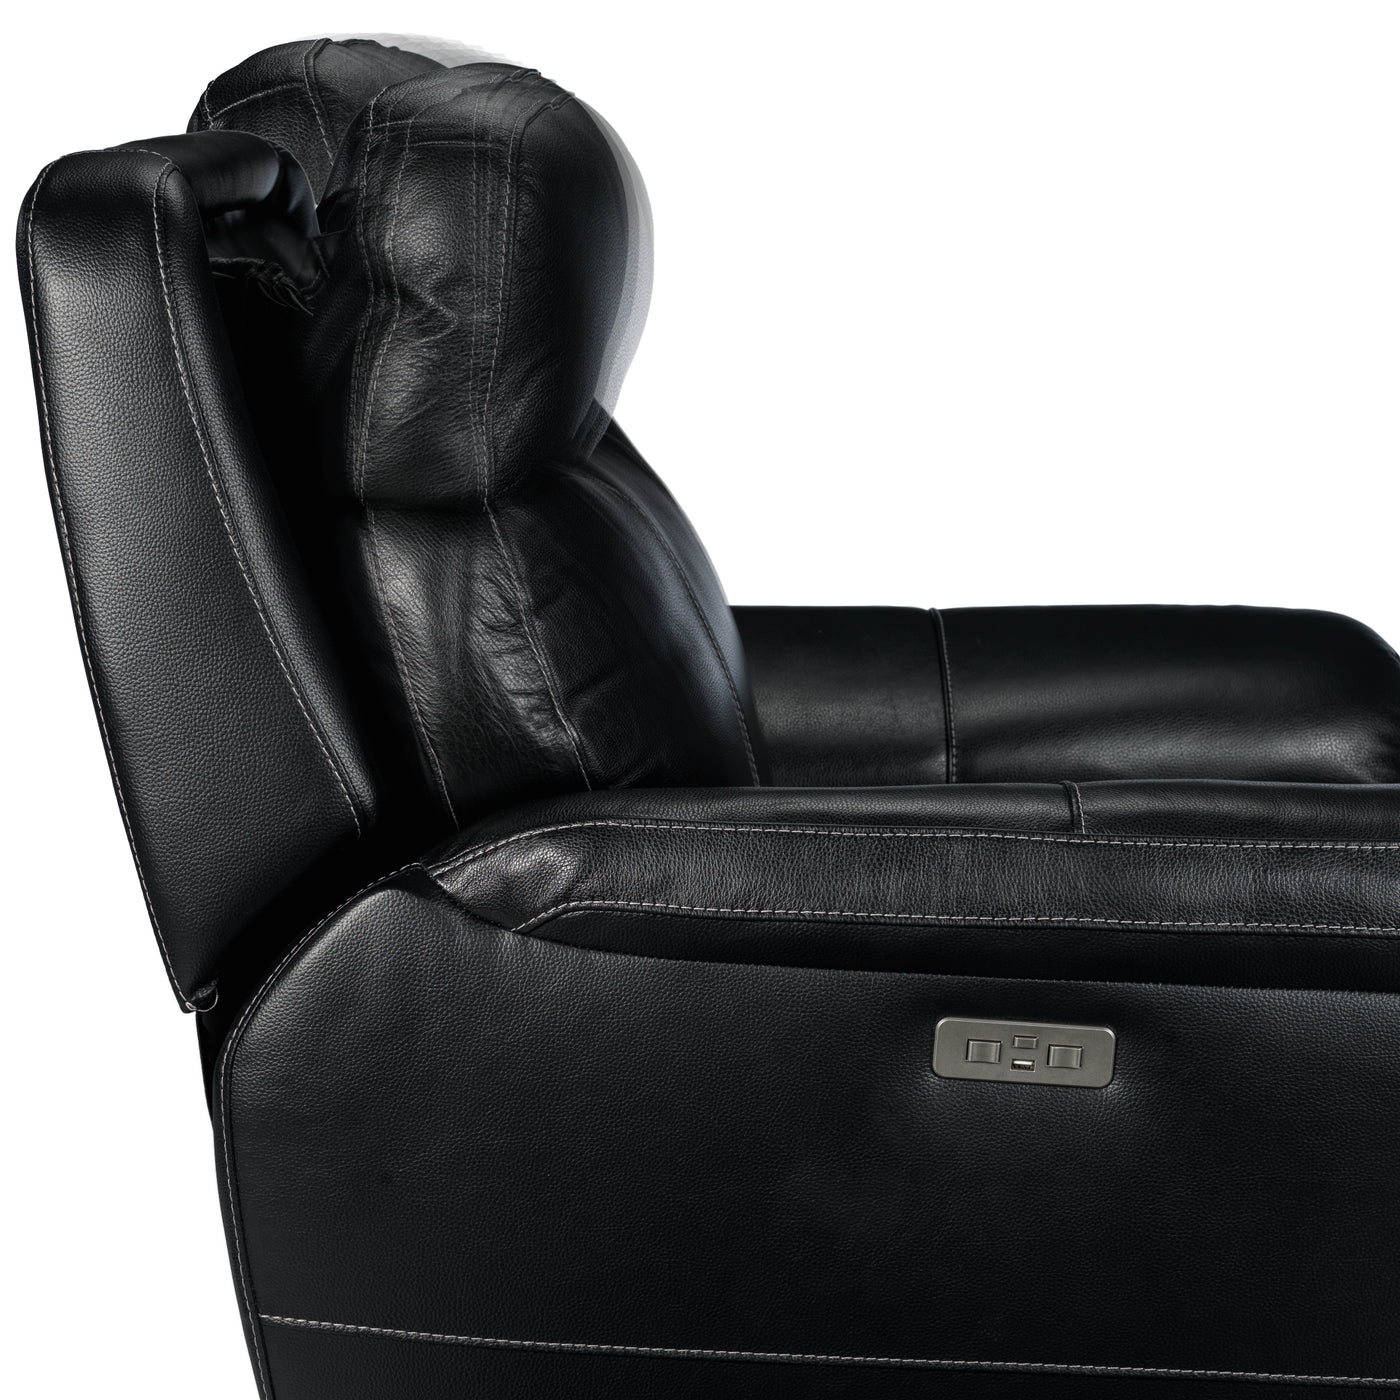 Stallion Leather Dual Power Reclining Sofa and Chair Set - Midnight Black